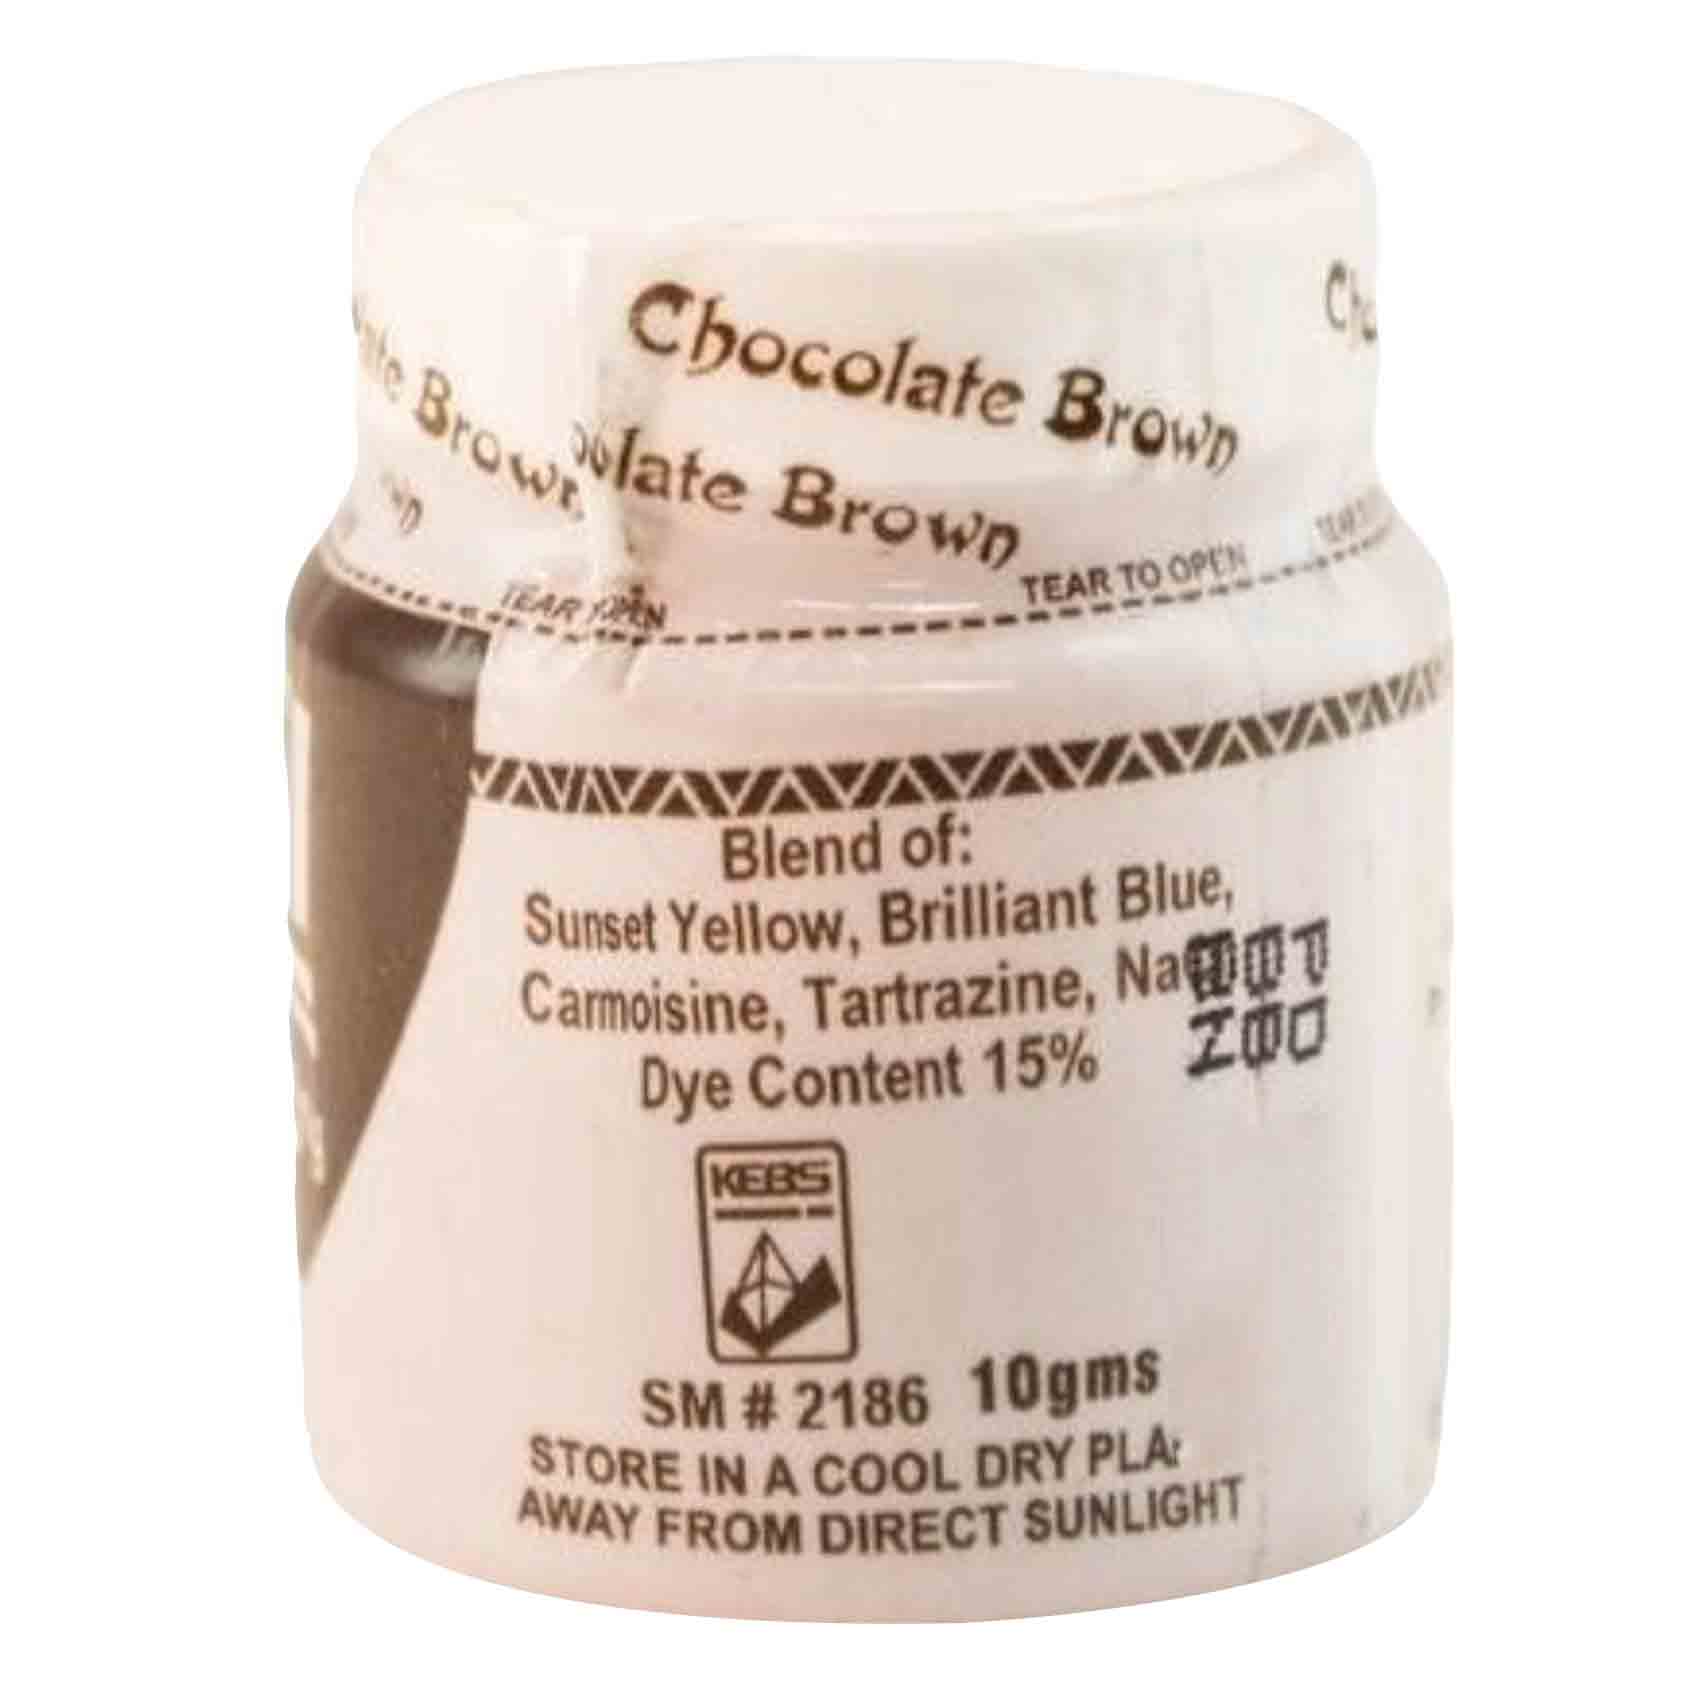 Festival Chocolate Brown Food Colour 10g